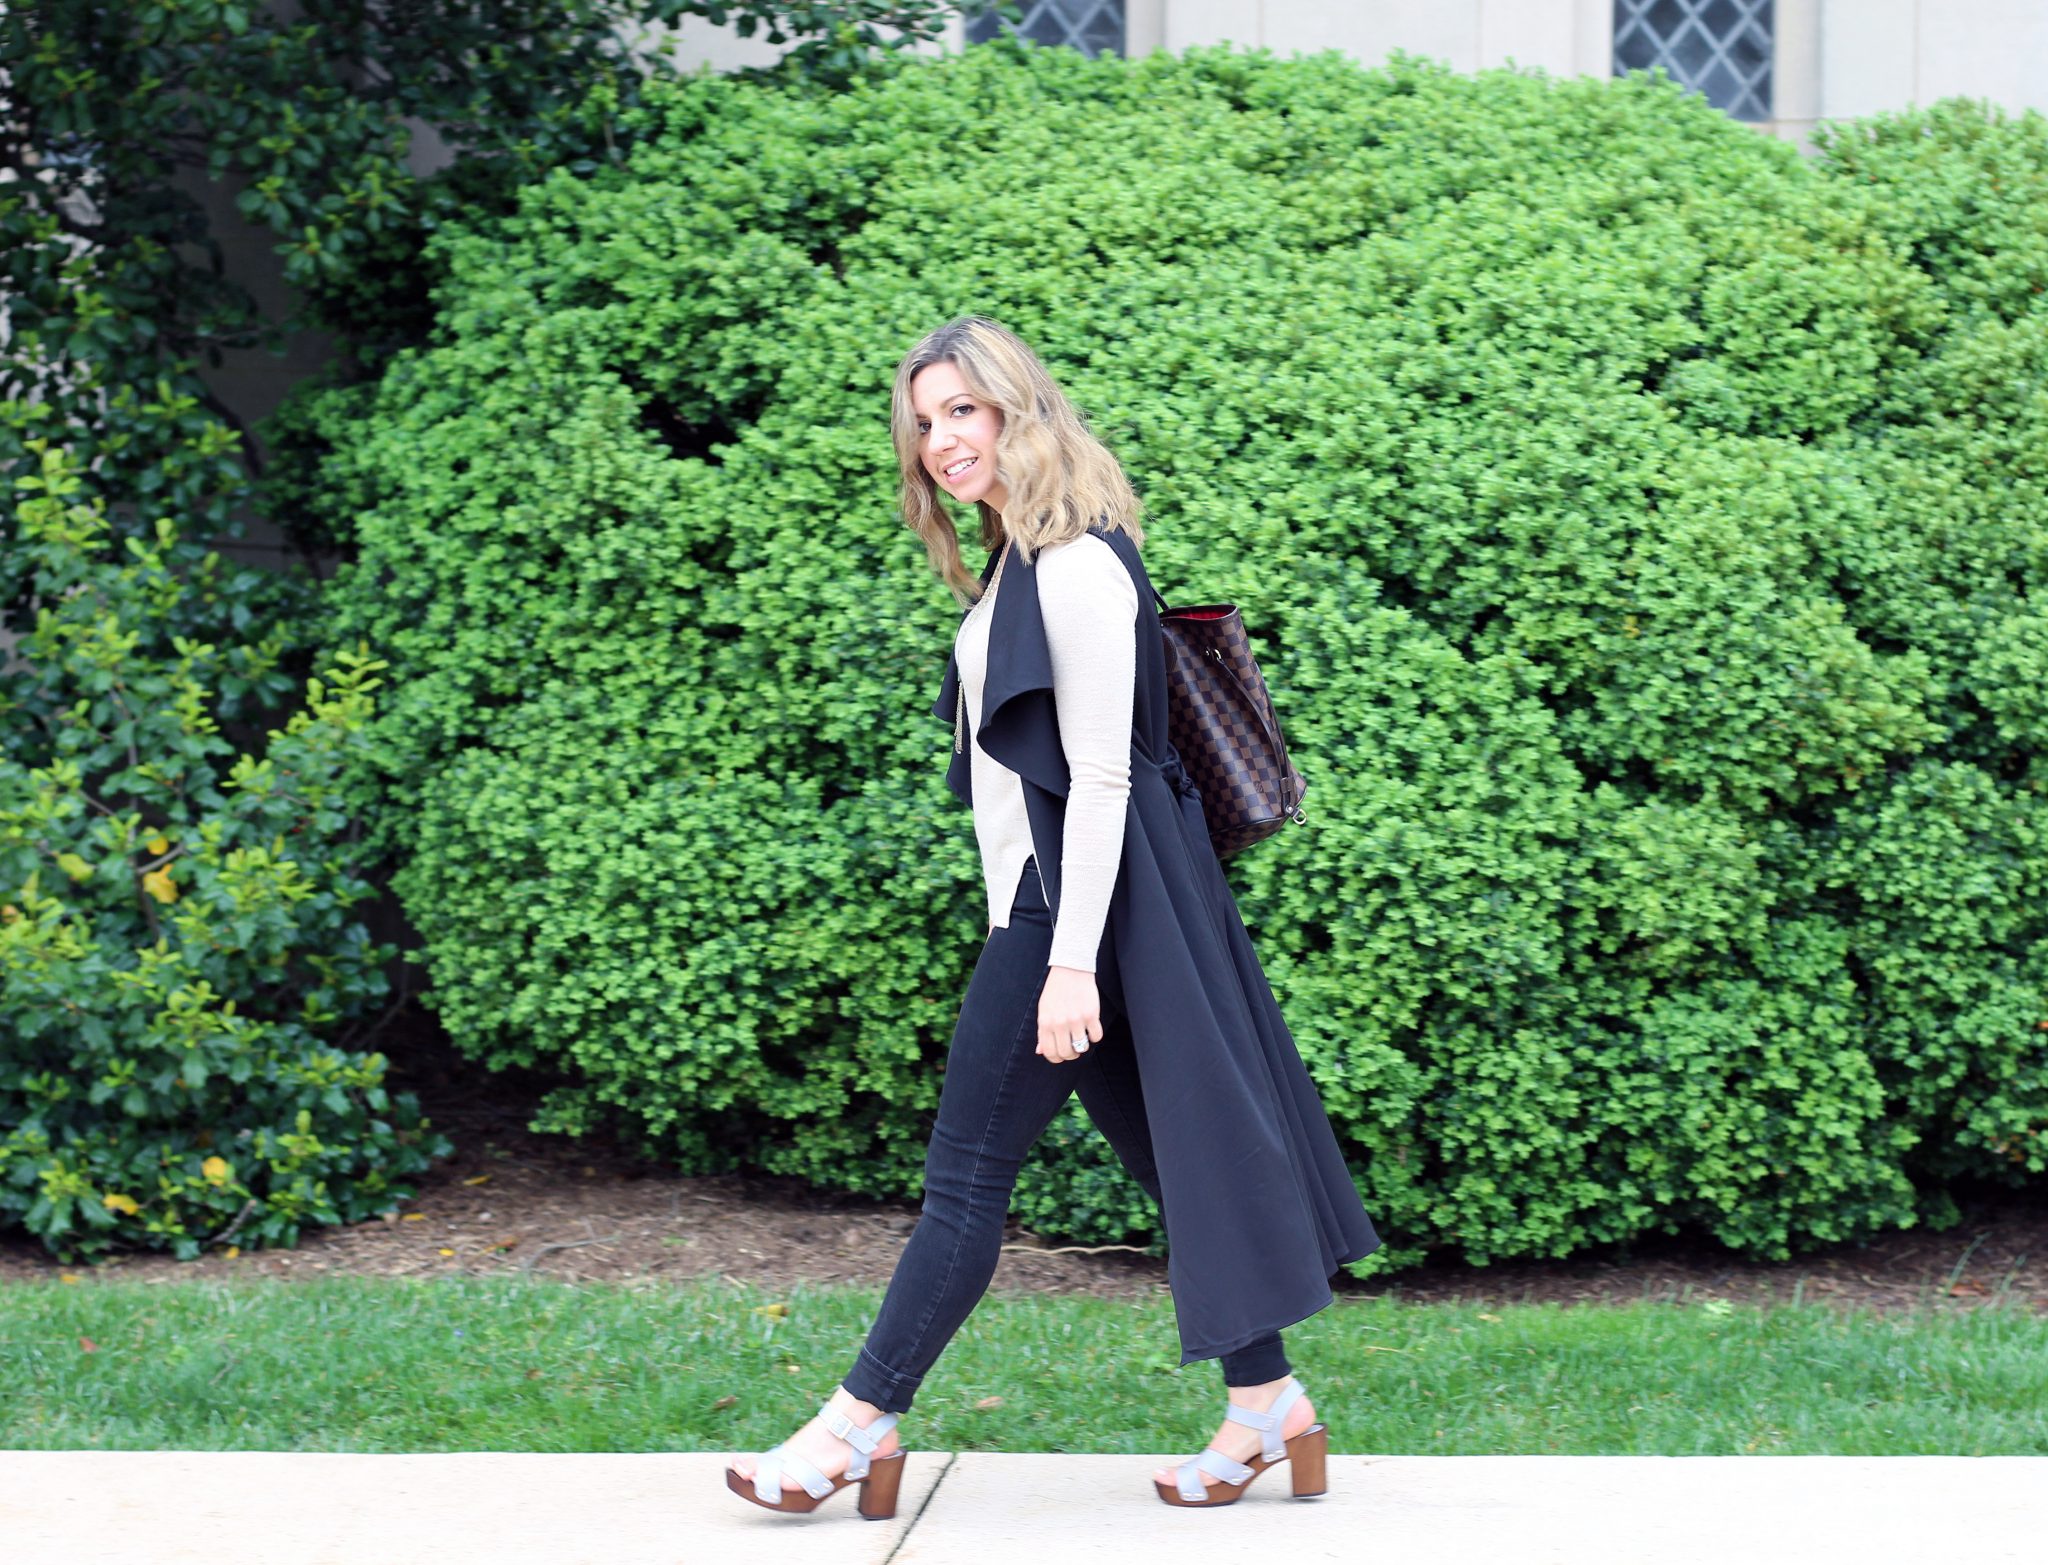 Sleeveless Trench | Glass of Glam - My Top Five Tips for Shopping at SheIn by popular DC fashion blogger Glass of Glam